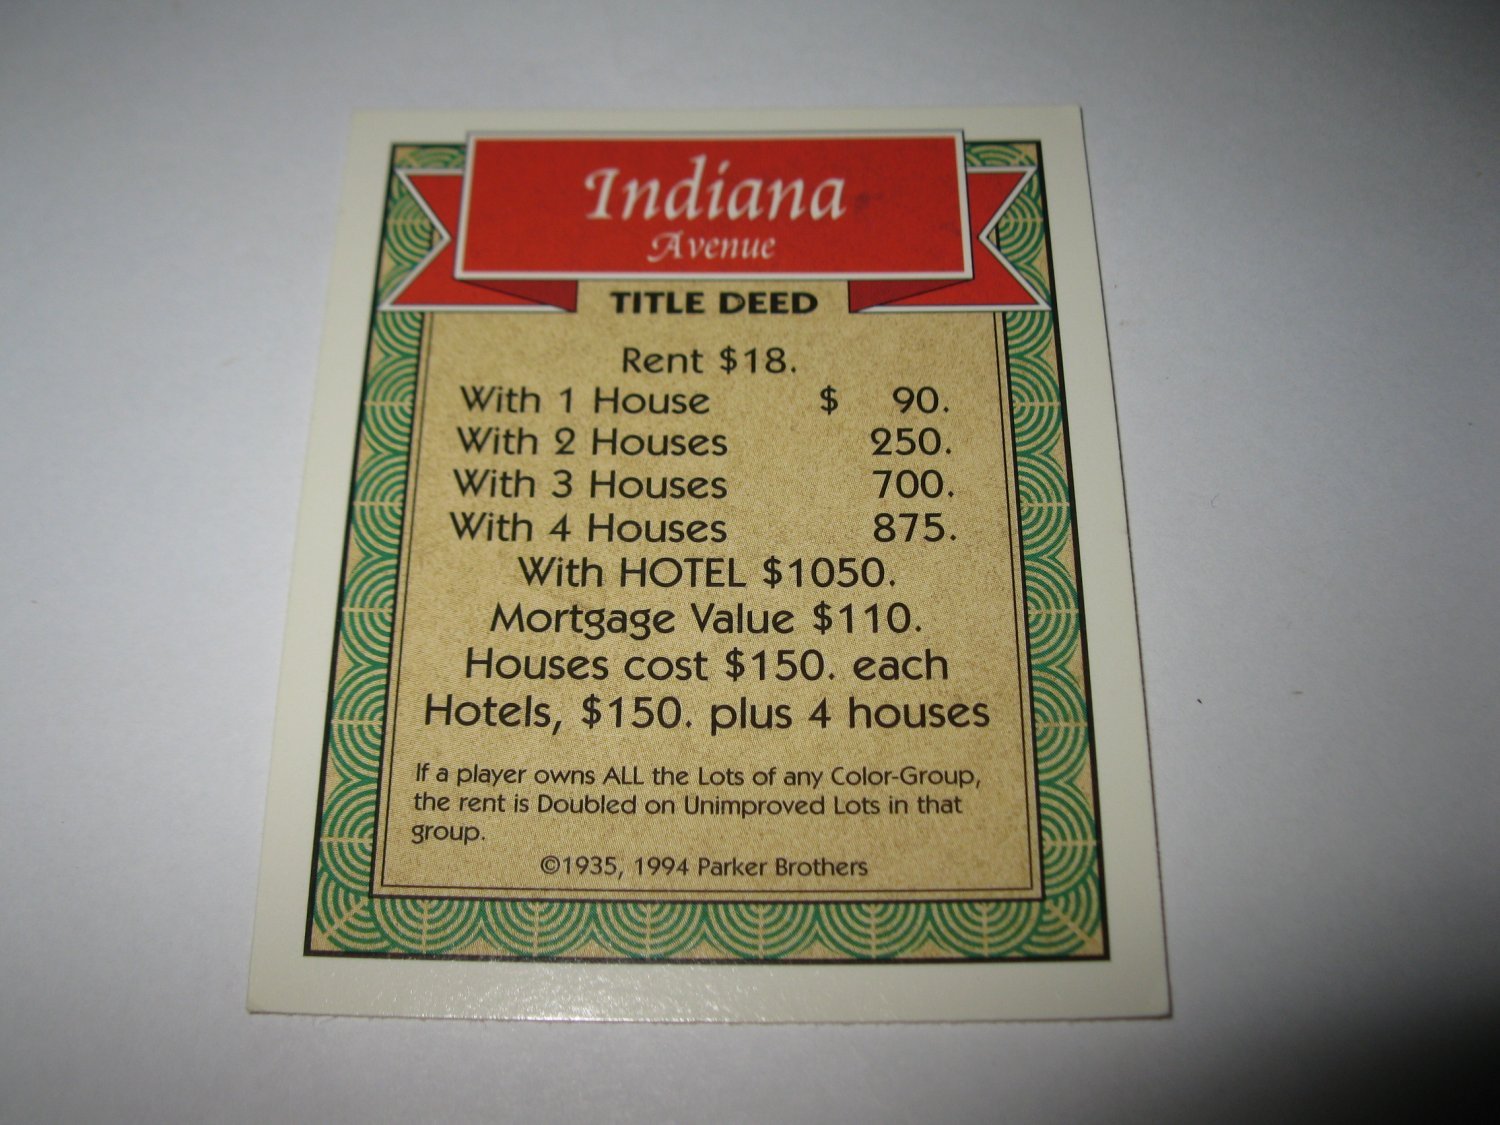 1995 Monopoly 60th Ann. Board Game Piece: Indiana Avenue Property Deed - $1.00